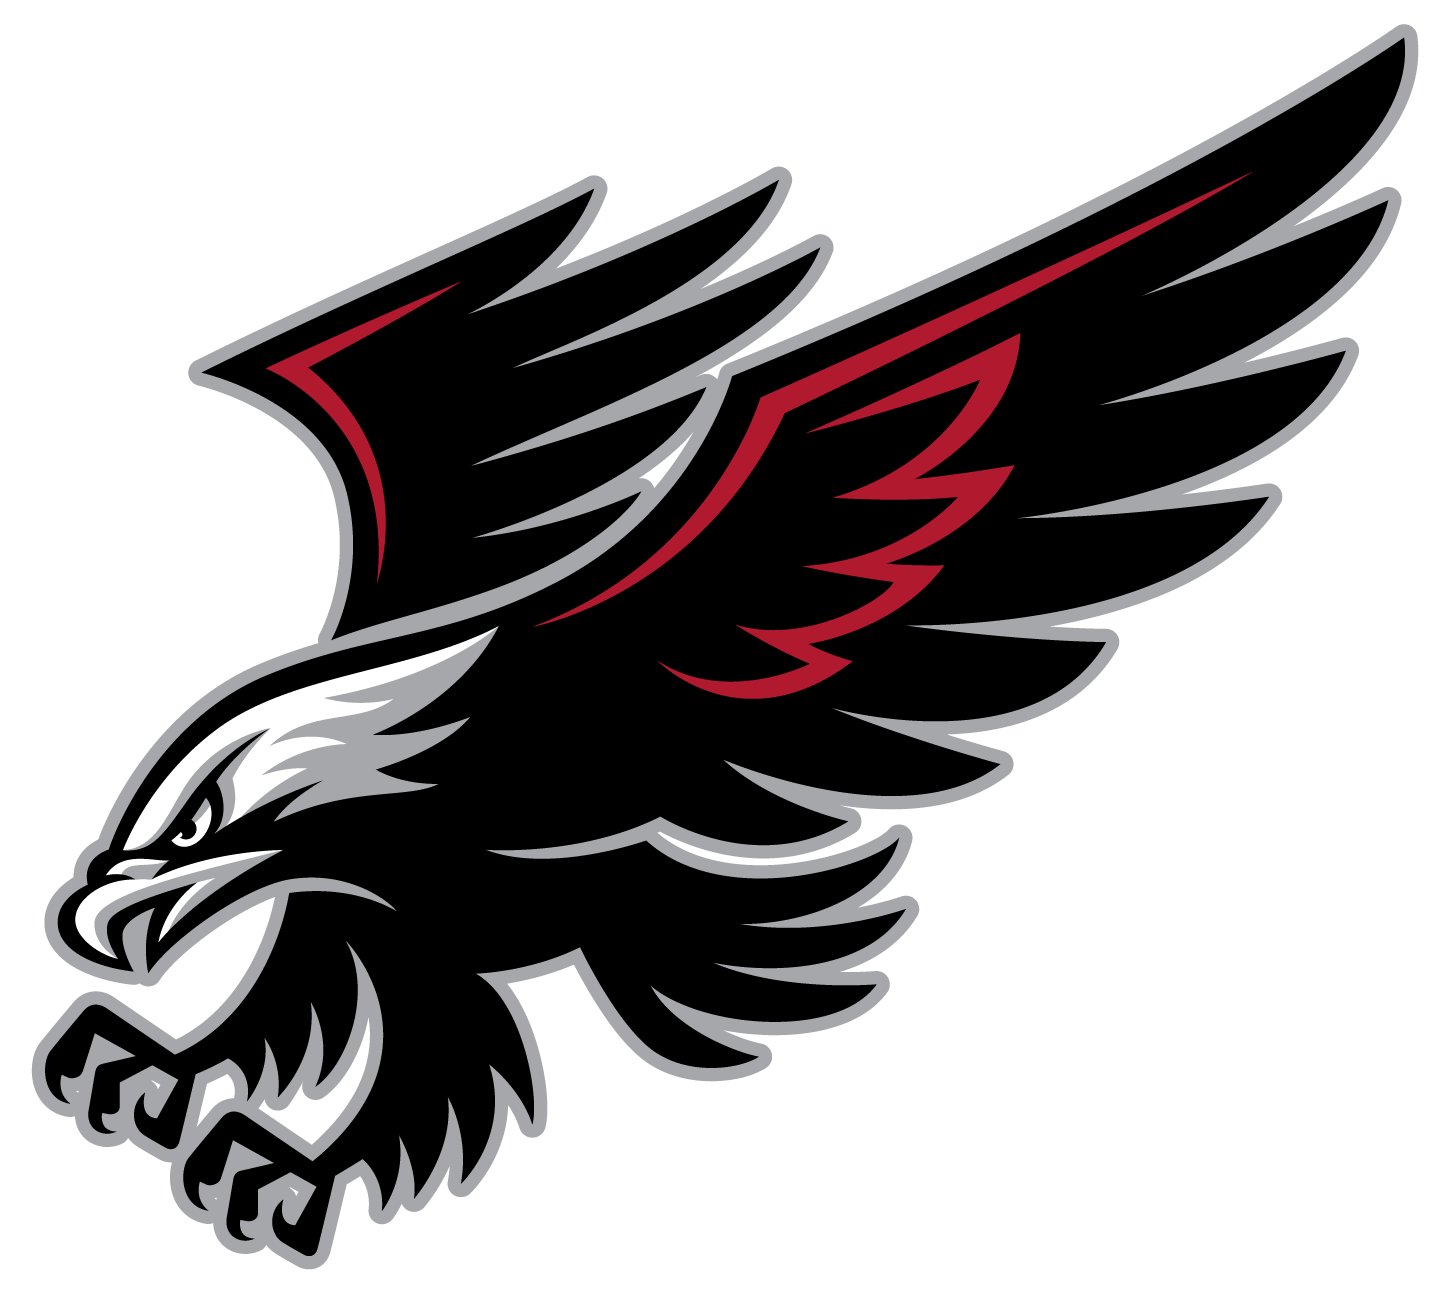 Red and White Hawk Logo - Free White Hawk Tattoo, Download Free Clip Art, Free Clip Art on ...